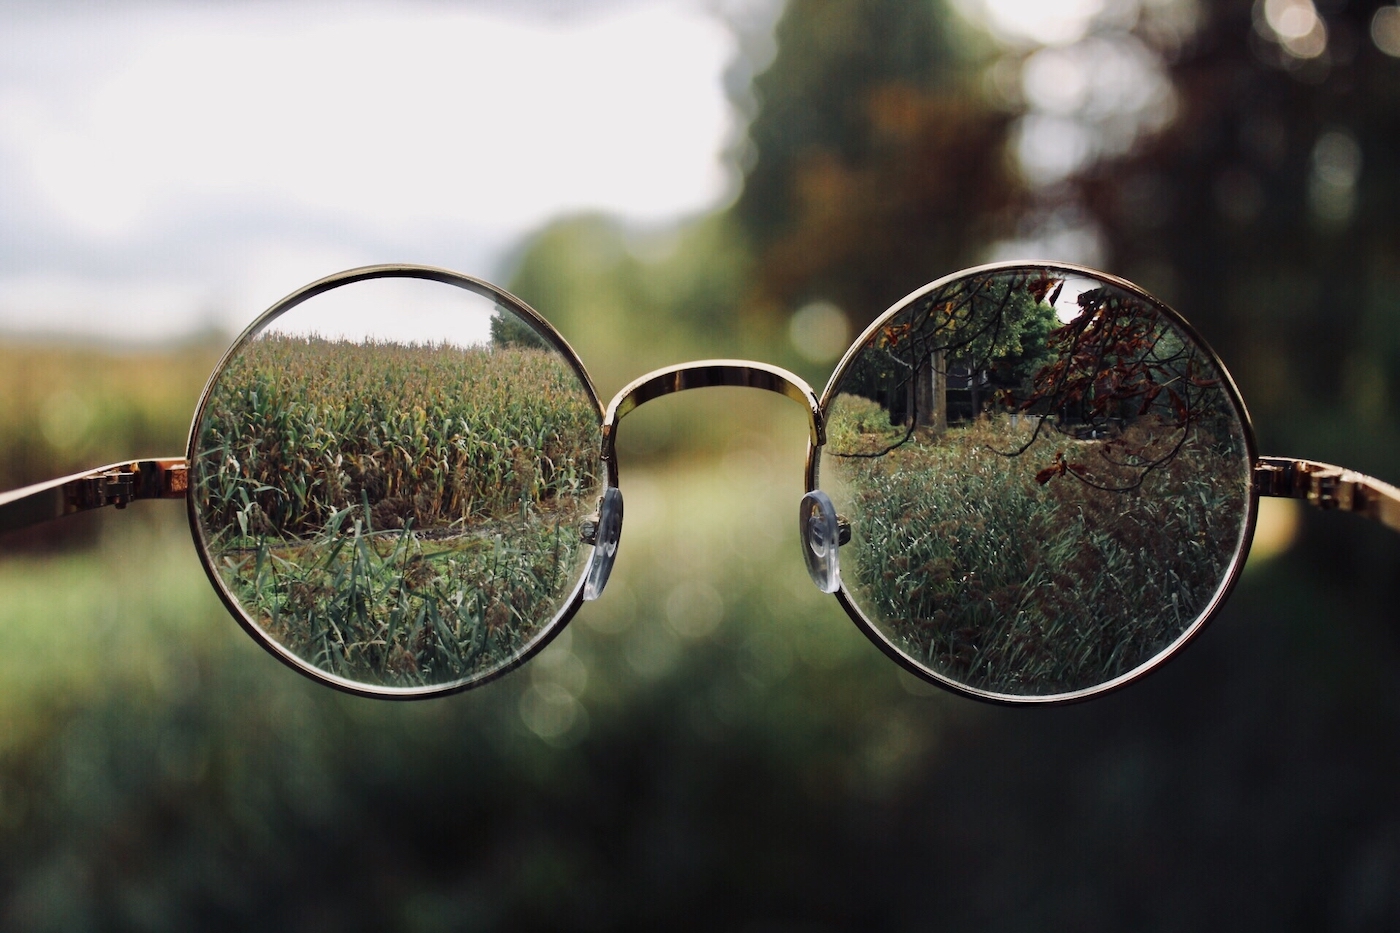 Close-Up Of Eyeglasses Against Grassy Field